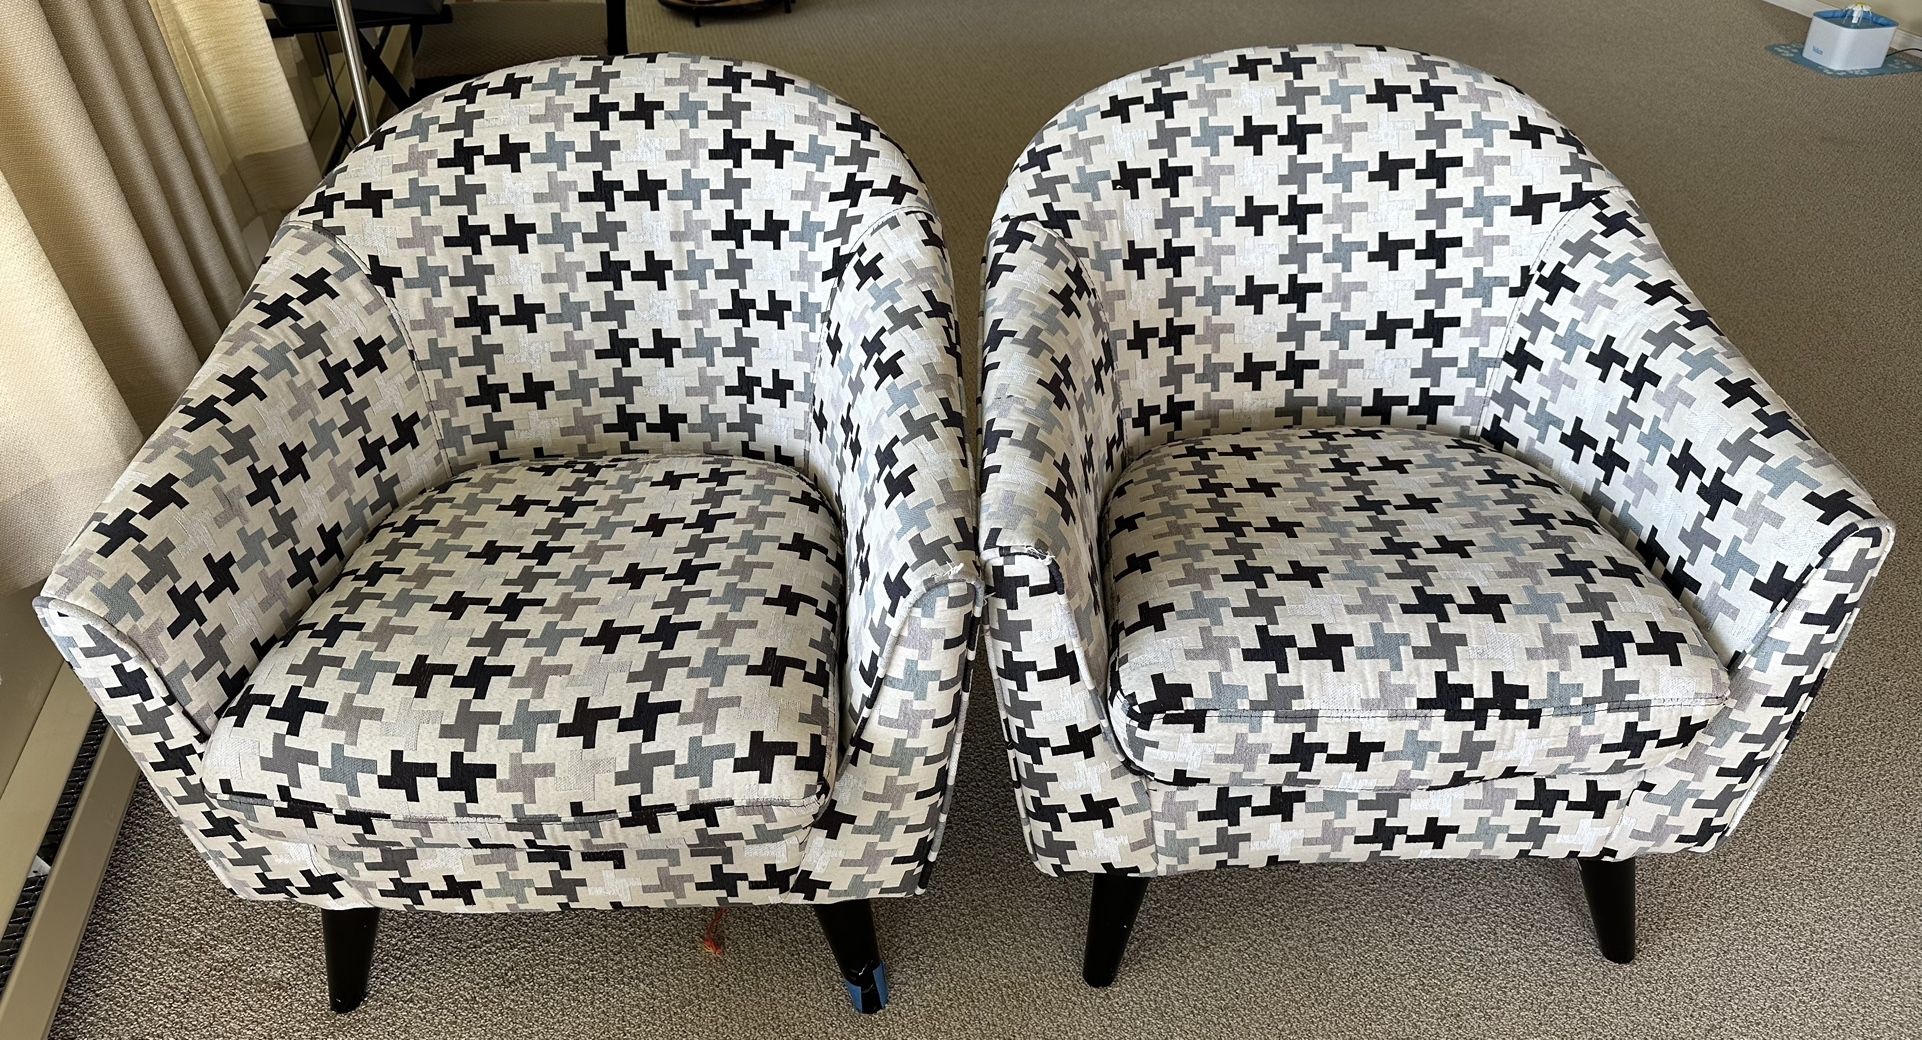 2 (two) Matching Accent Chairs